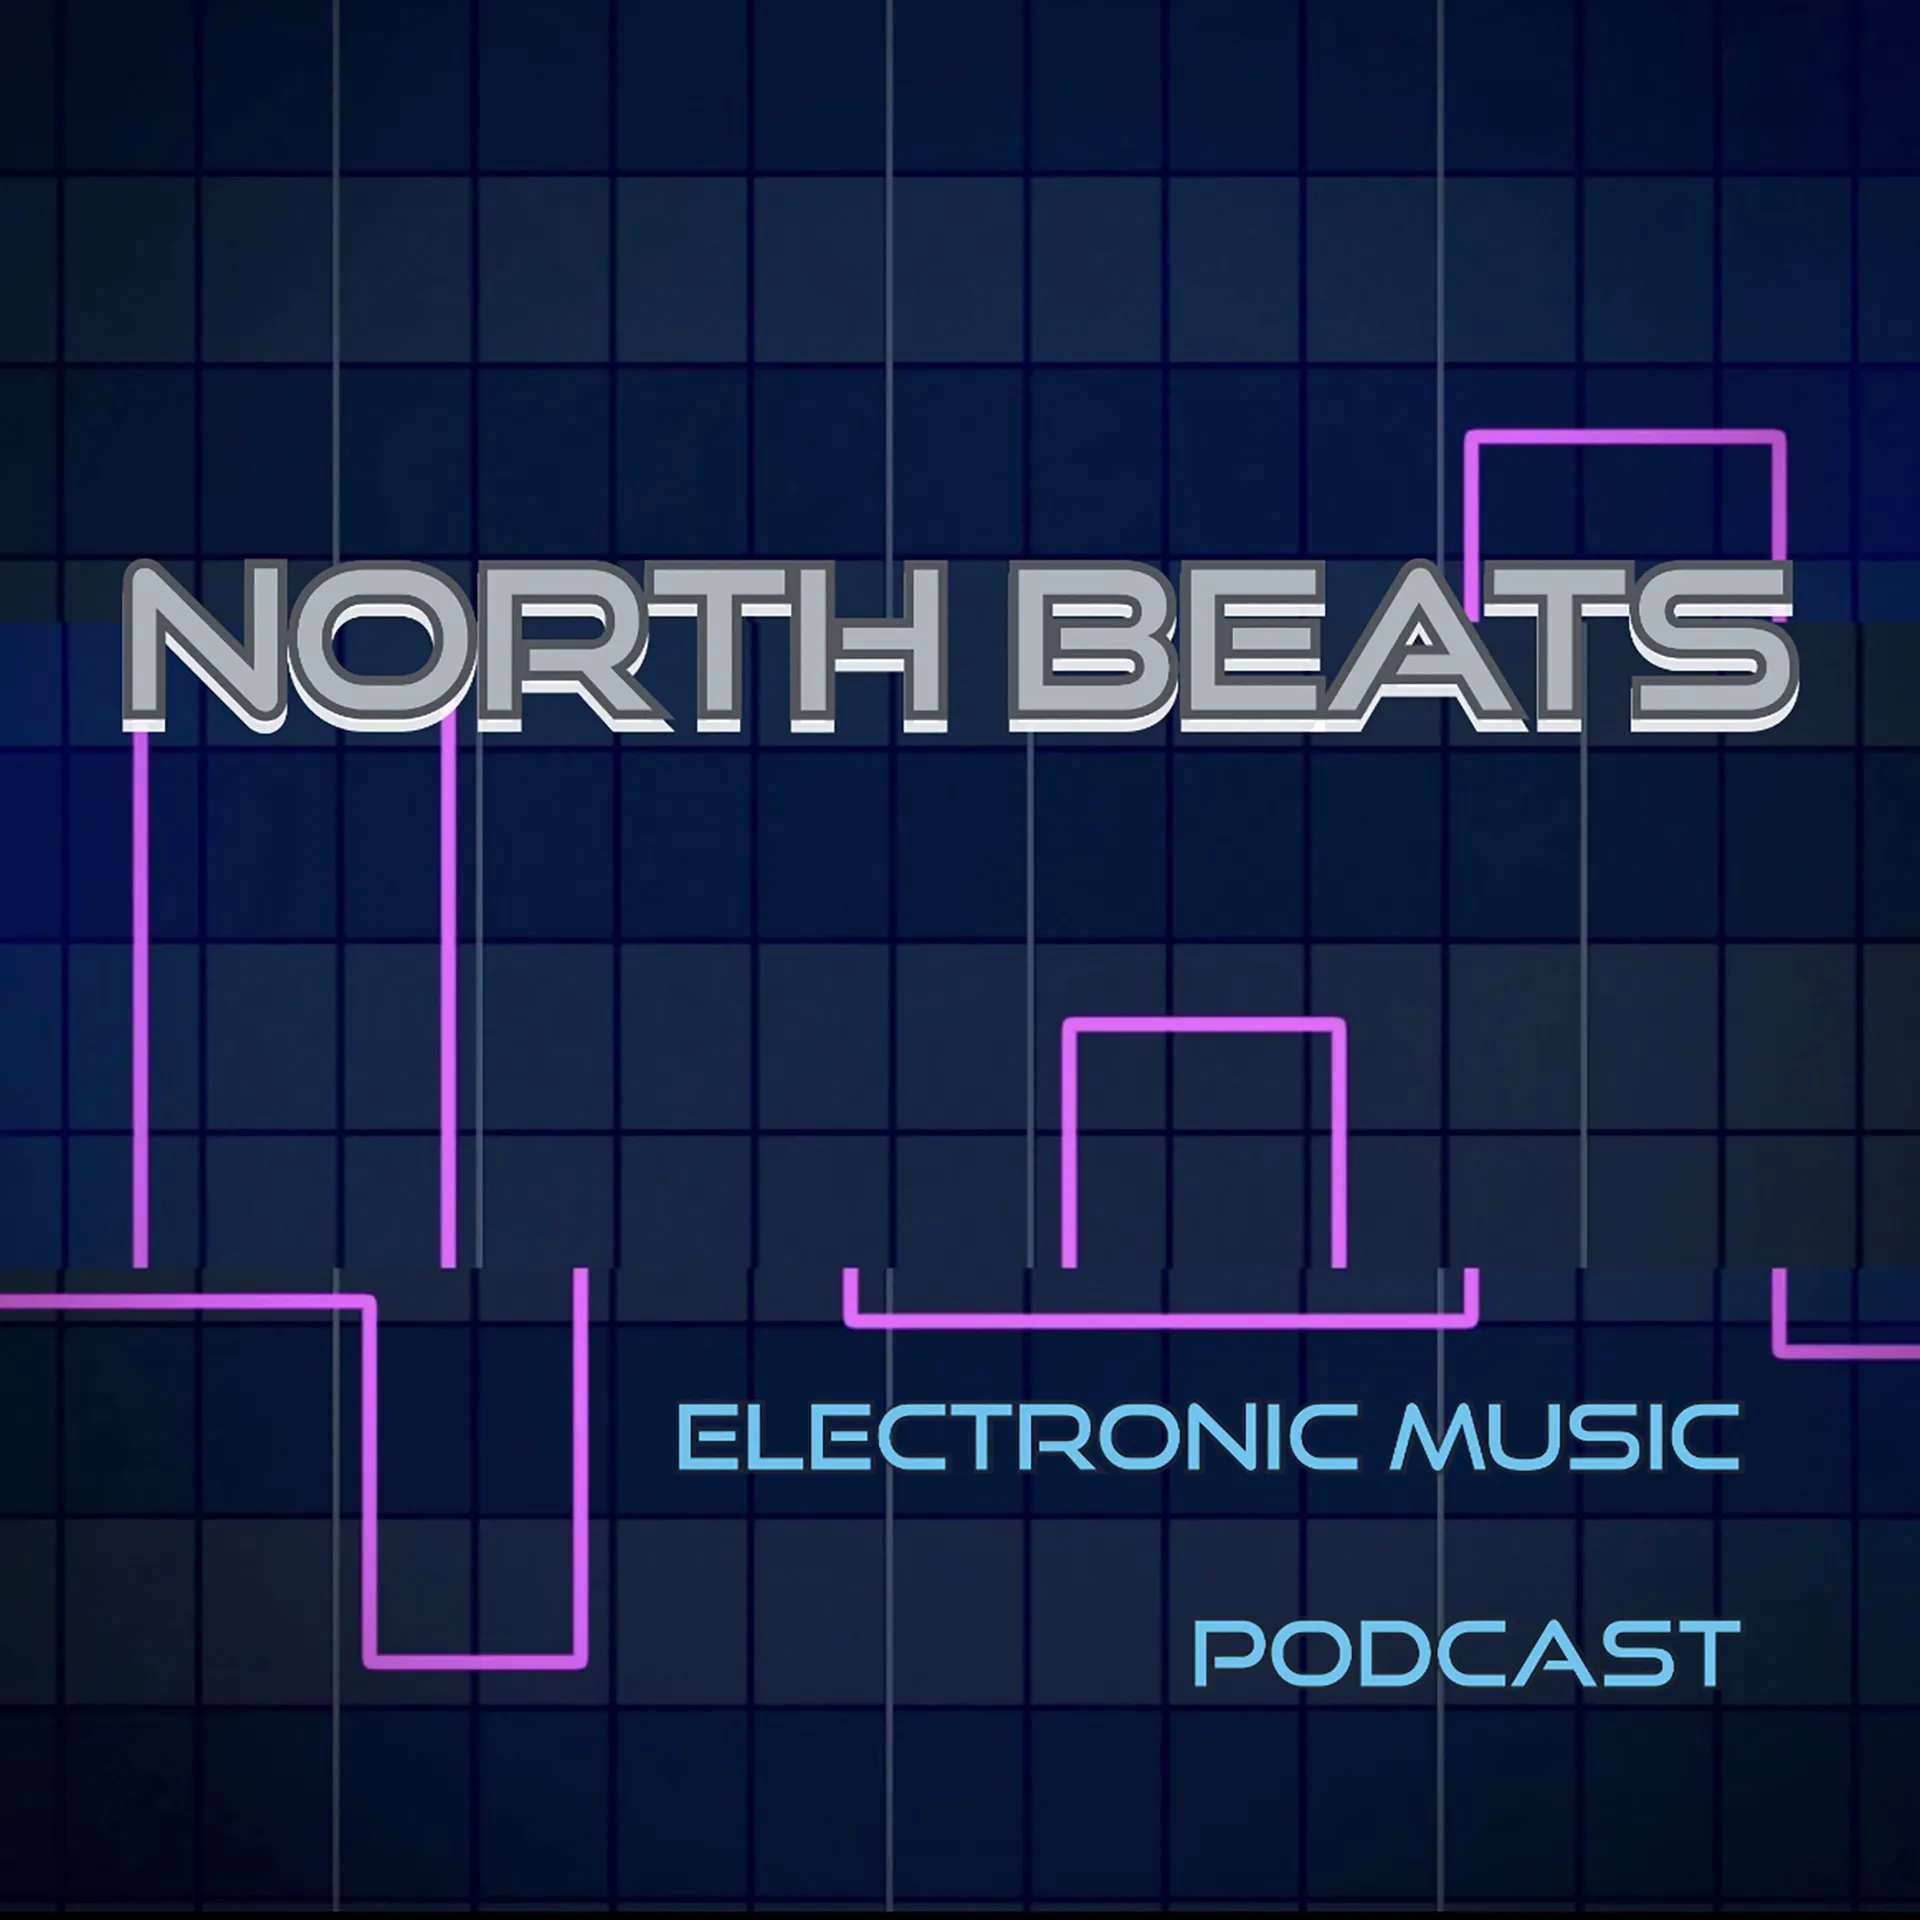 Next Expanse interview on North Beats podcast